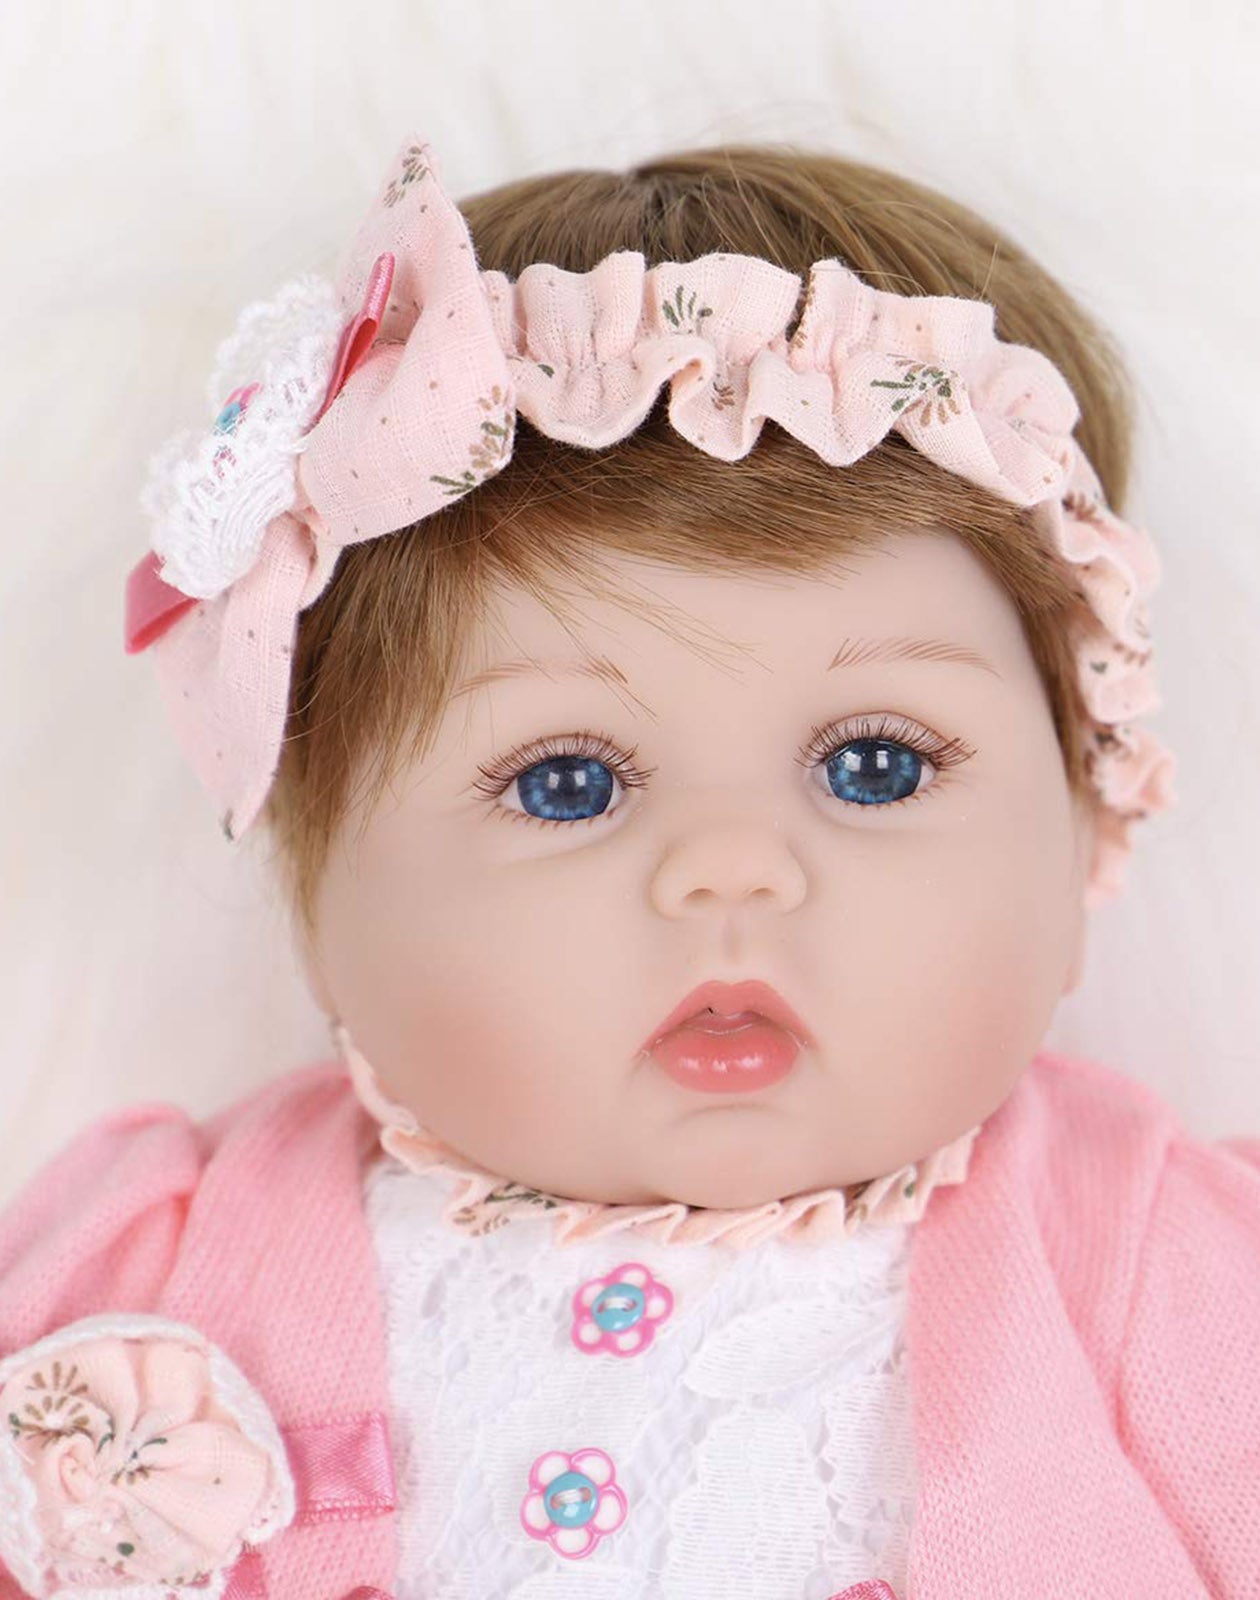 Beryl - 22" Reborn Baby Dolls Cute Toddlers Girl with Chubby Face